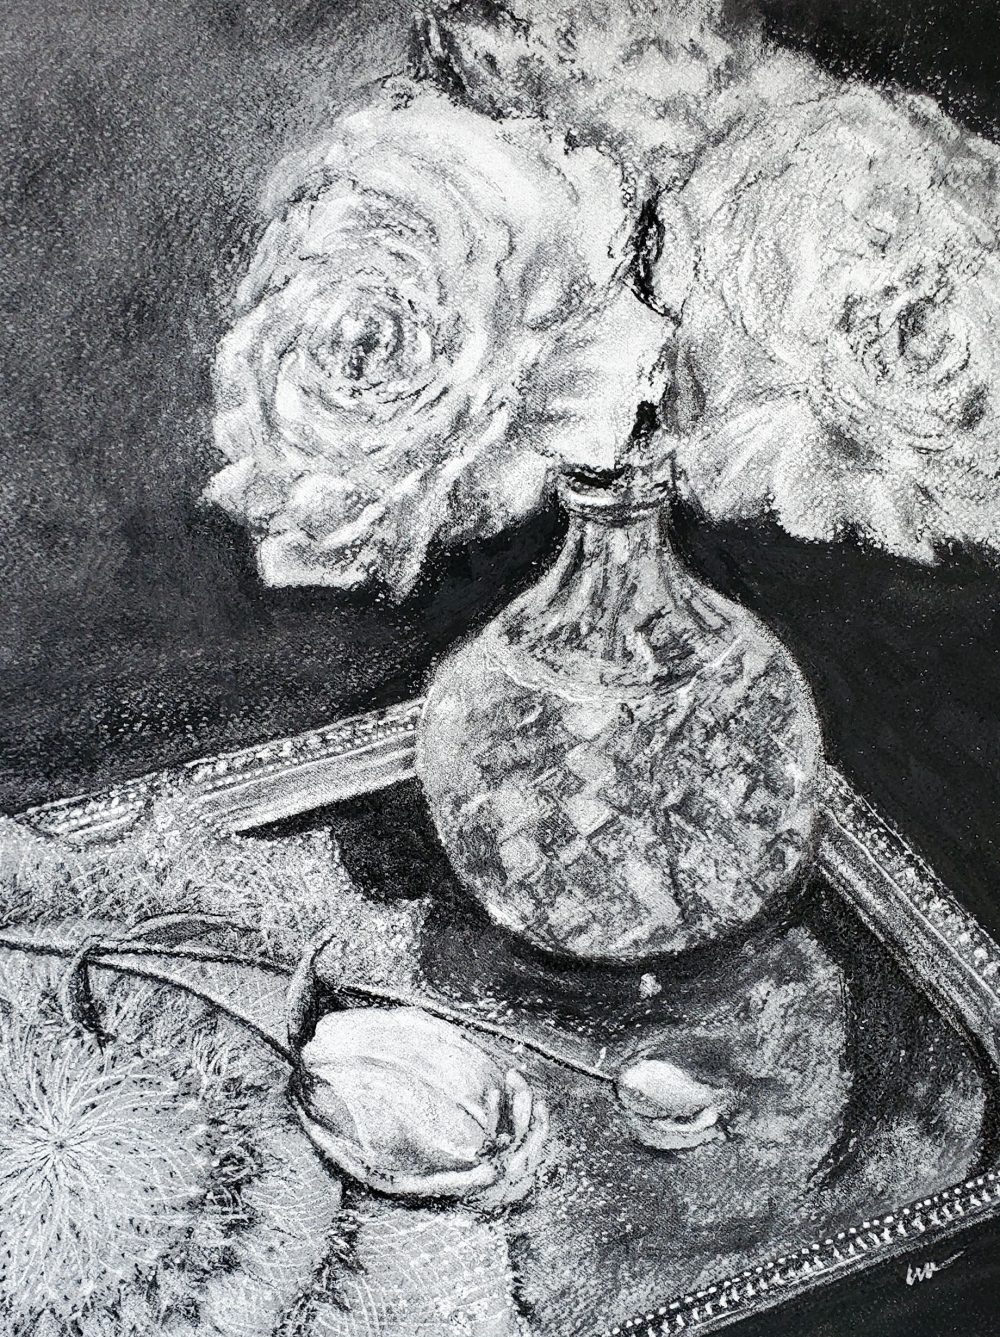 A charcoal drawing featuring a silver tray containing a faceted glass vase with three roses in full bloom and two rosebuds placed on a lace doily against a dark background.